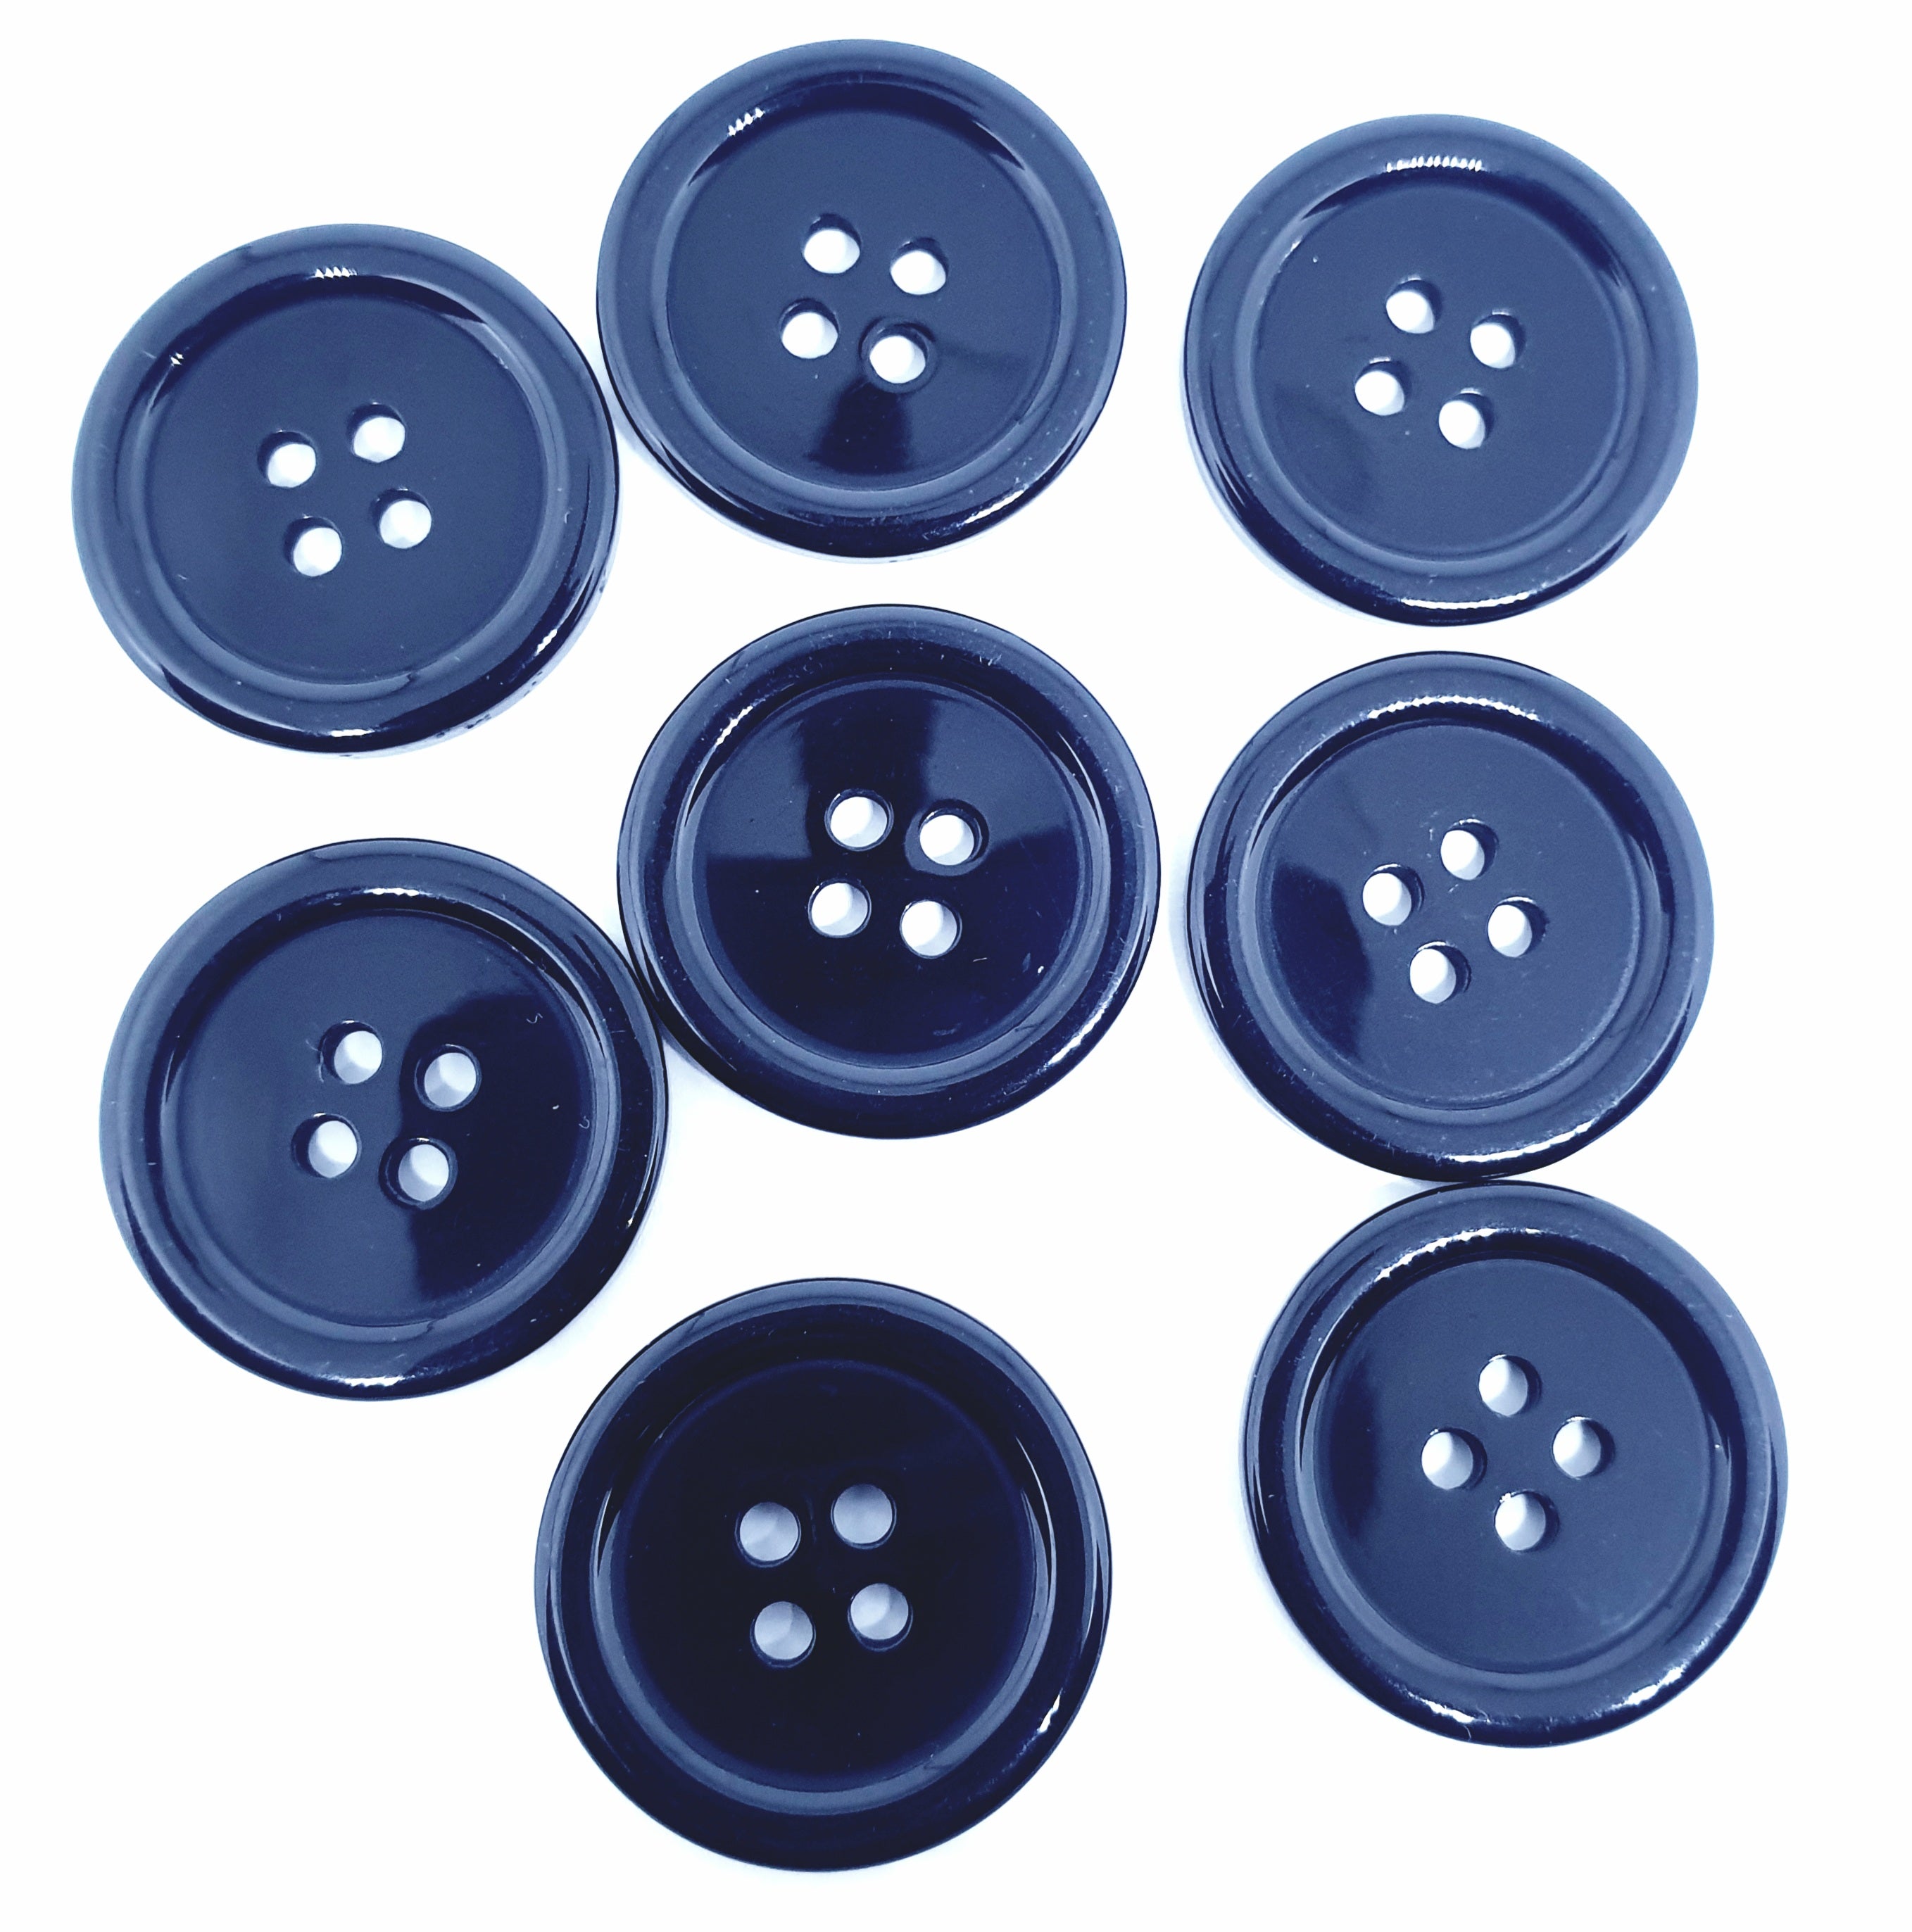 MajorCrafts 24pcs 25mm Black 4 Holes Round Large Resin Sewing Buttons